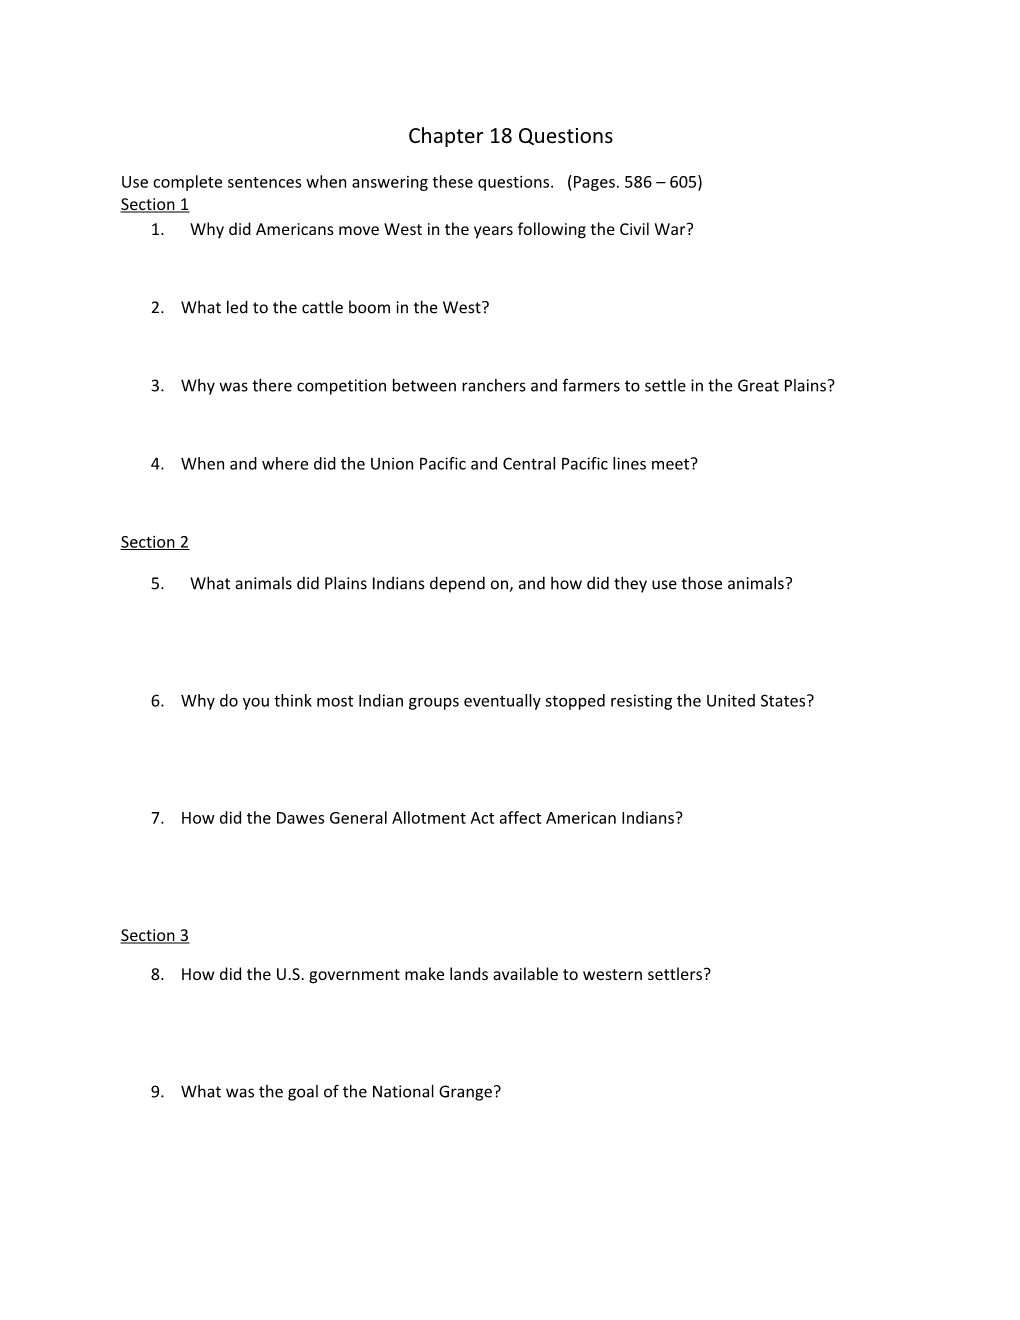 Use Complete Sentences When Answering These Questions. (Pages. 586 605)